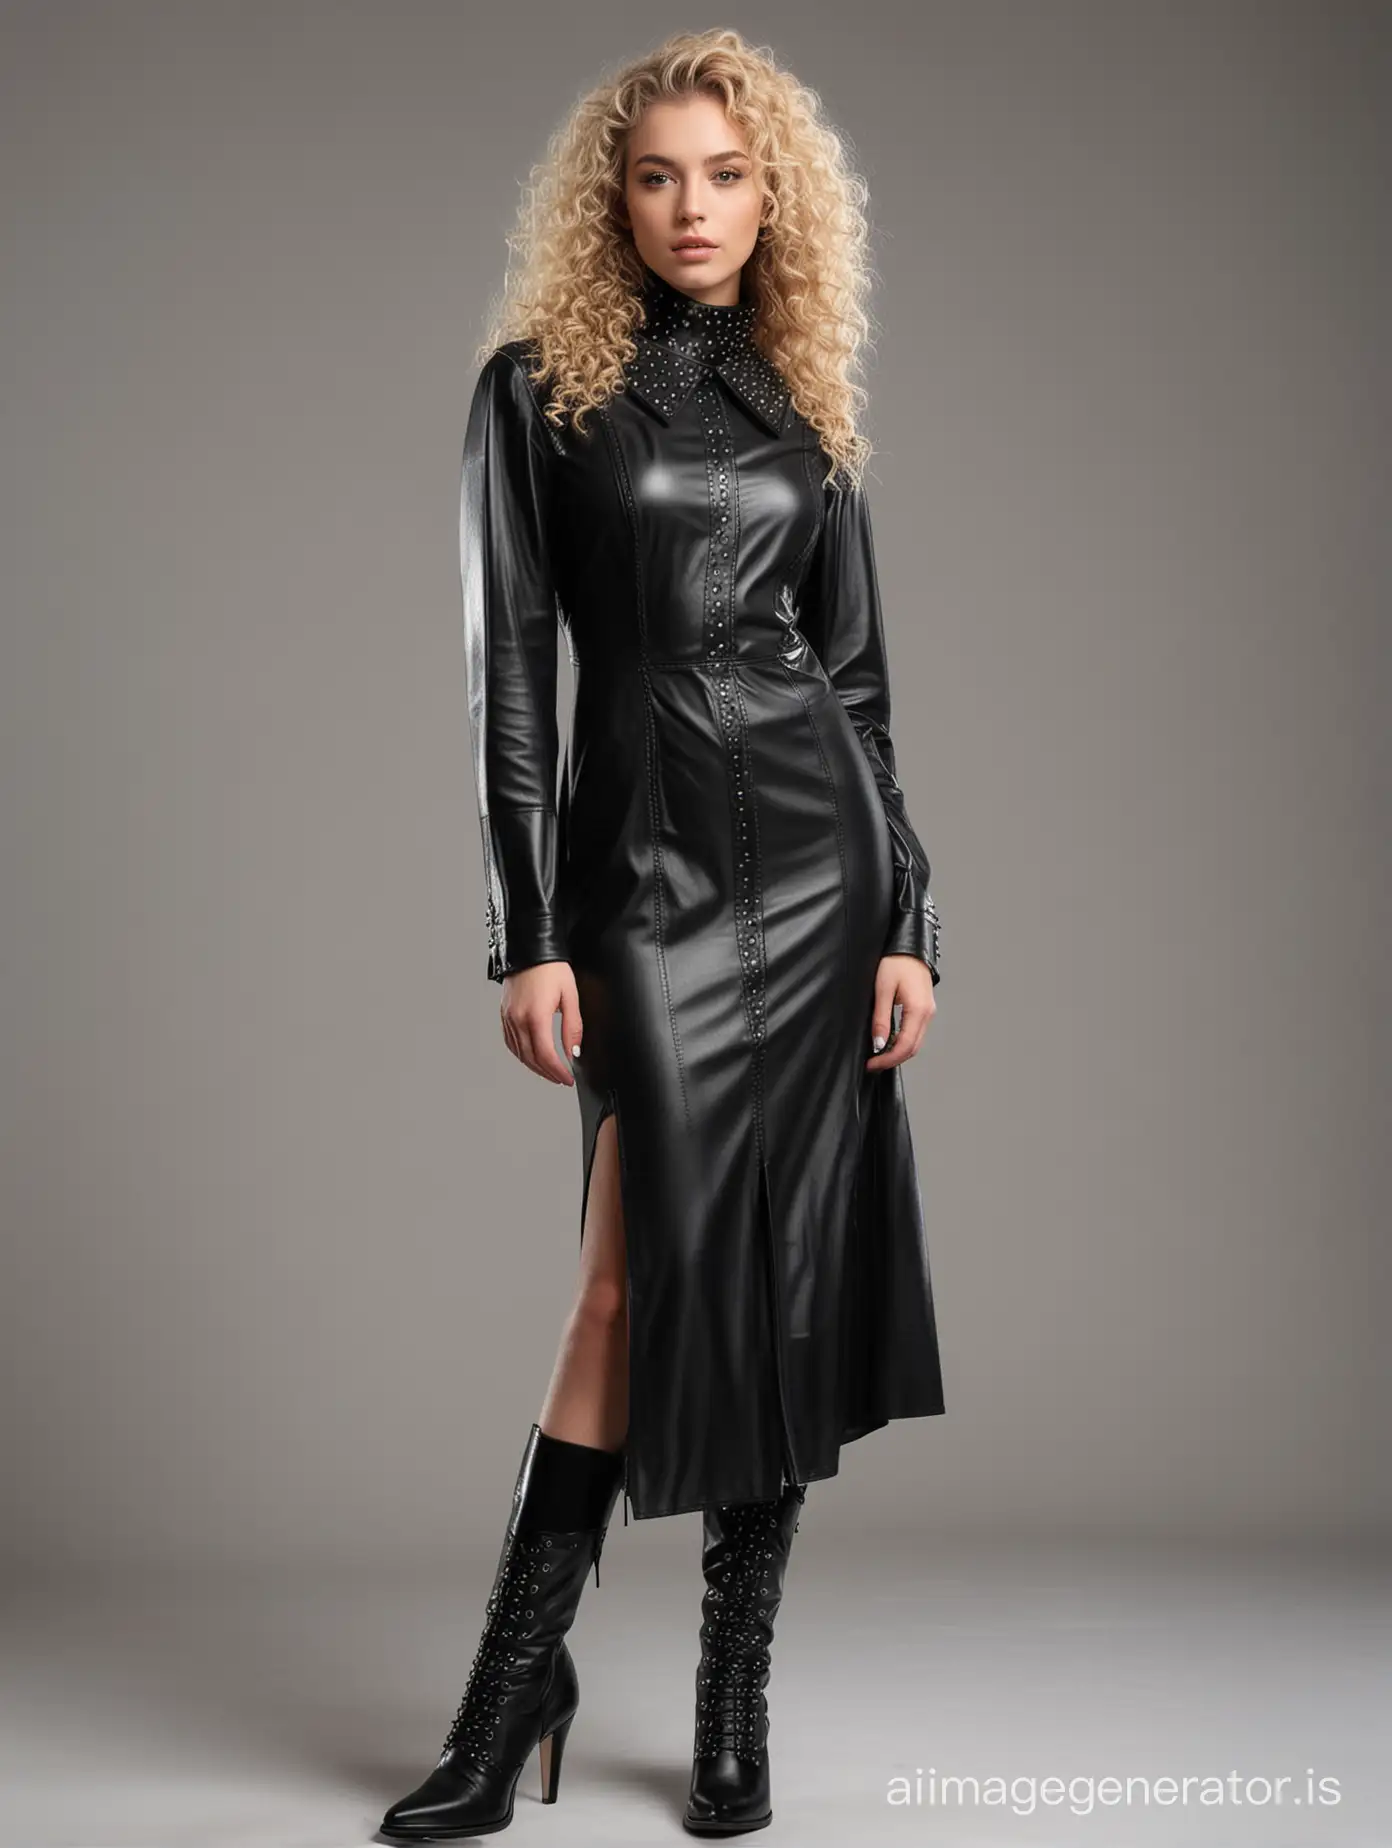 full length view beautiful fashion model with blond curly hair, fashion poses. a soft smile. standing elegantly. Wide leather collar with metal spikes and elegant long dress made of plexiglass and black boots